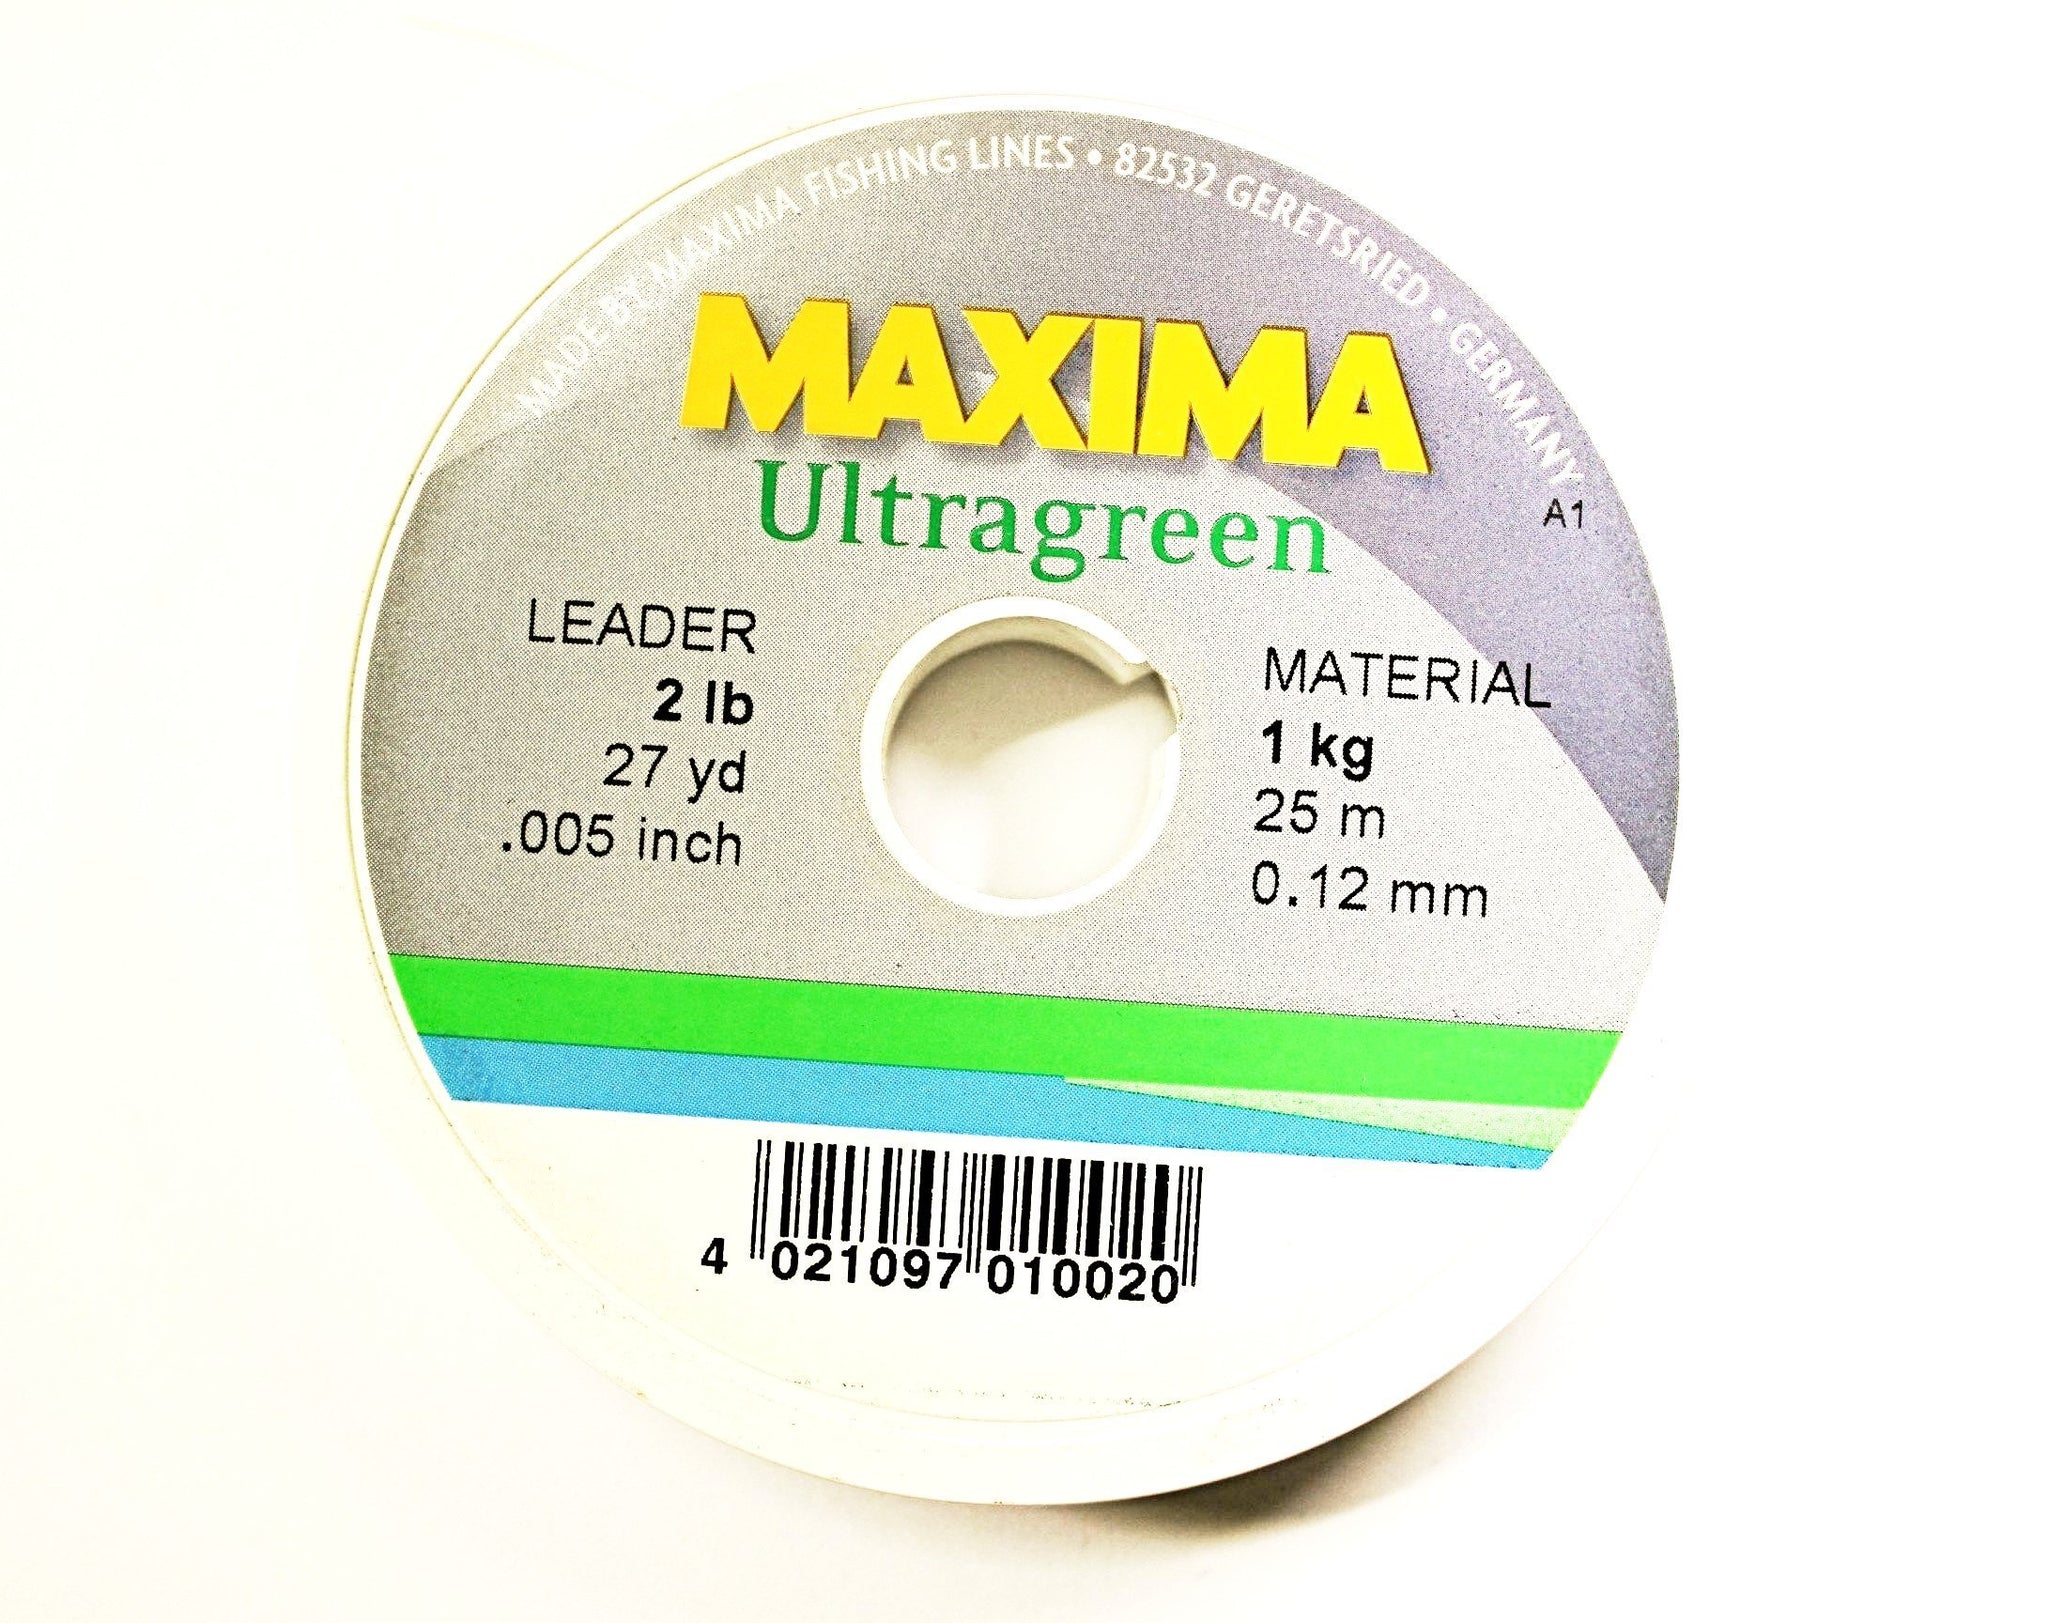 Maxima Ultragreen Leader Material 25m – Ultimate Fishing and Outdoors